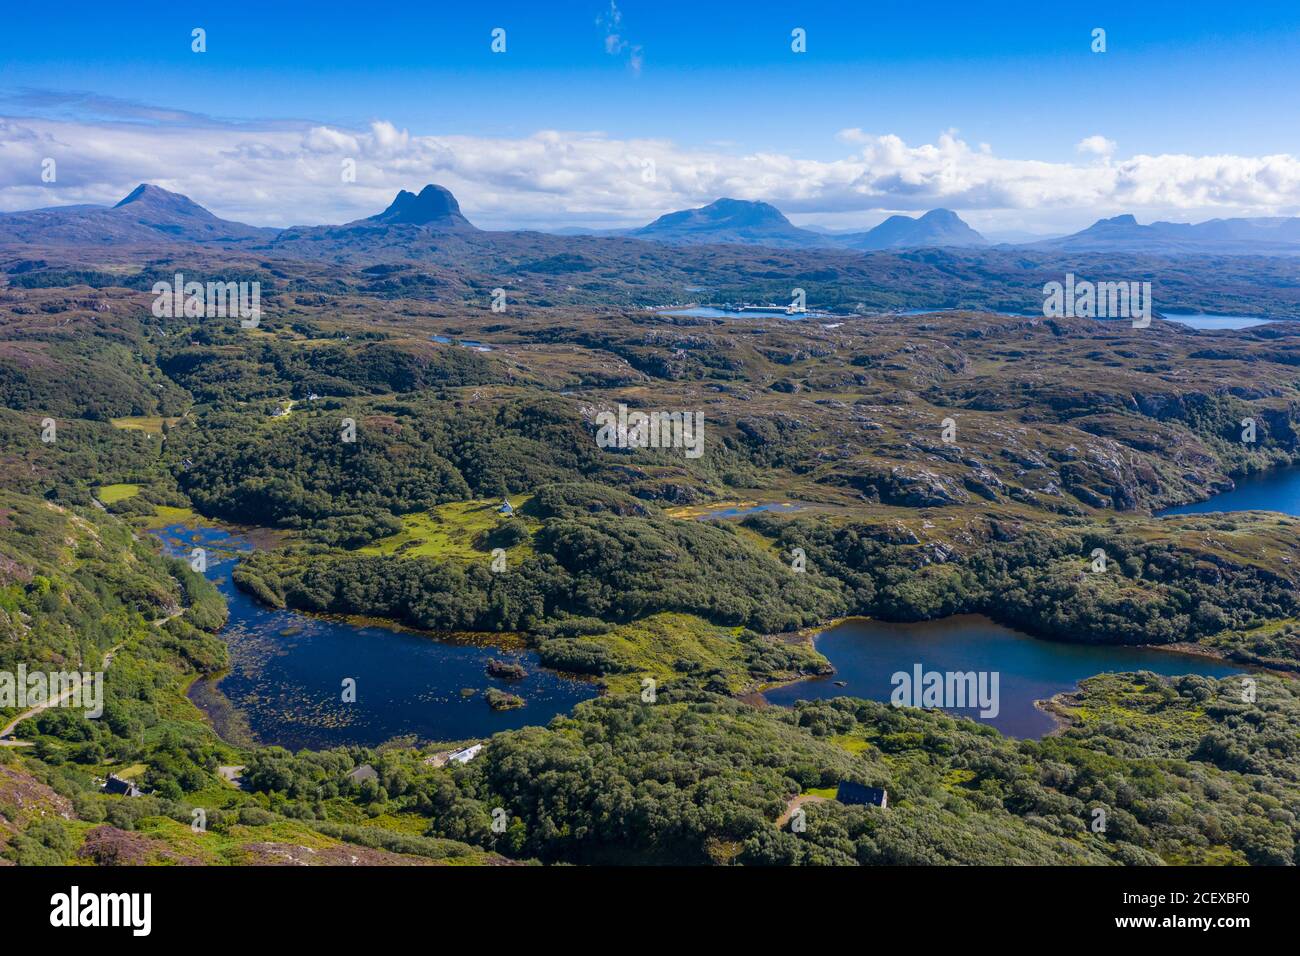 Aerial view of mountains in Assynt Coigach region of Scottish Highlands, Scotland, UK Stock Photo